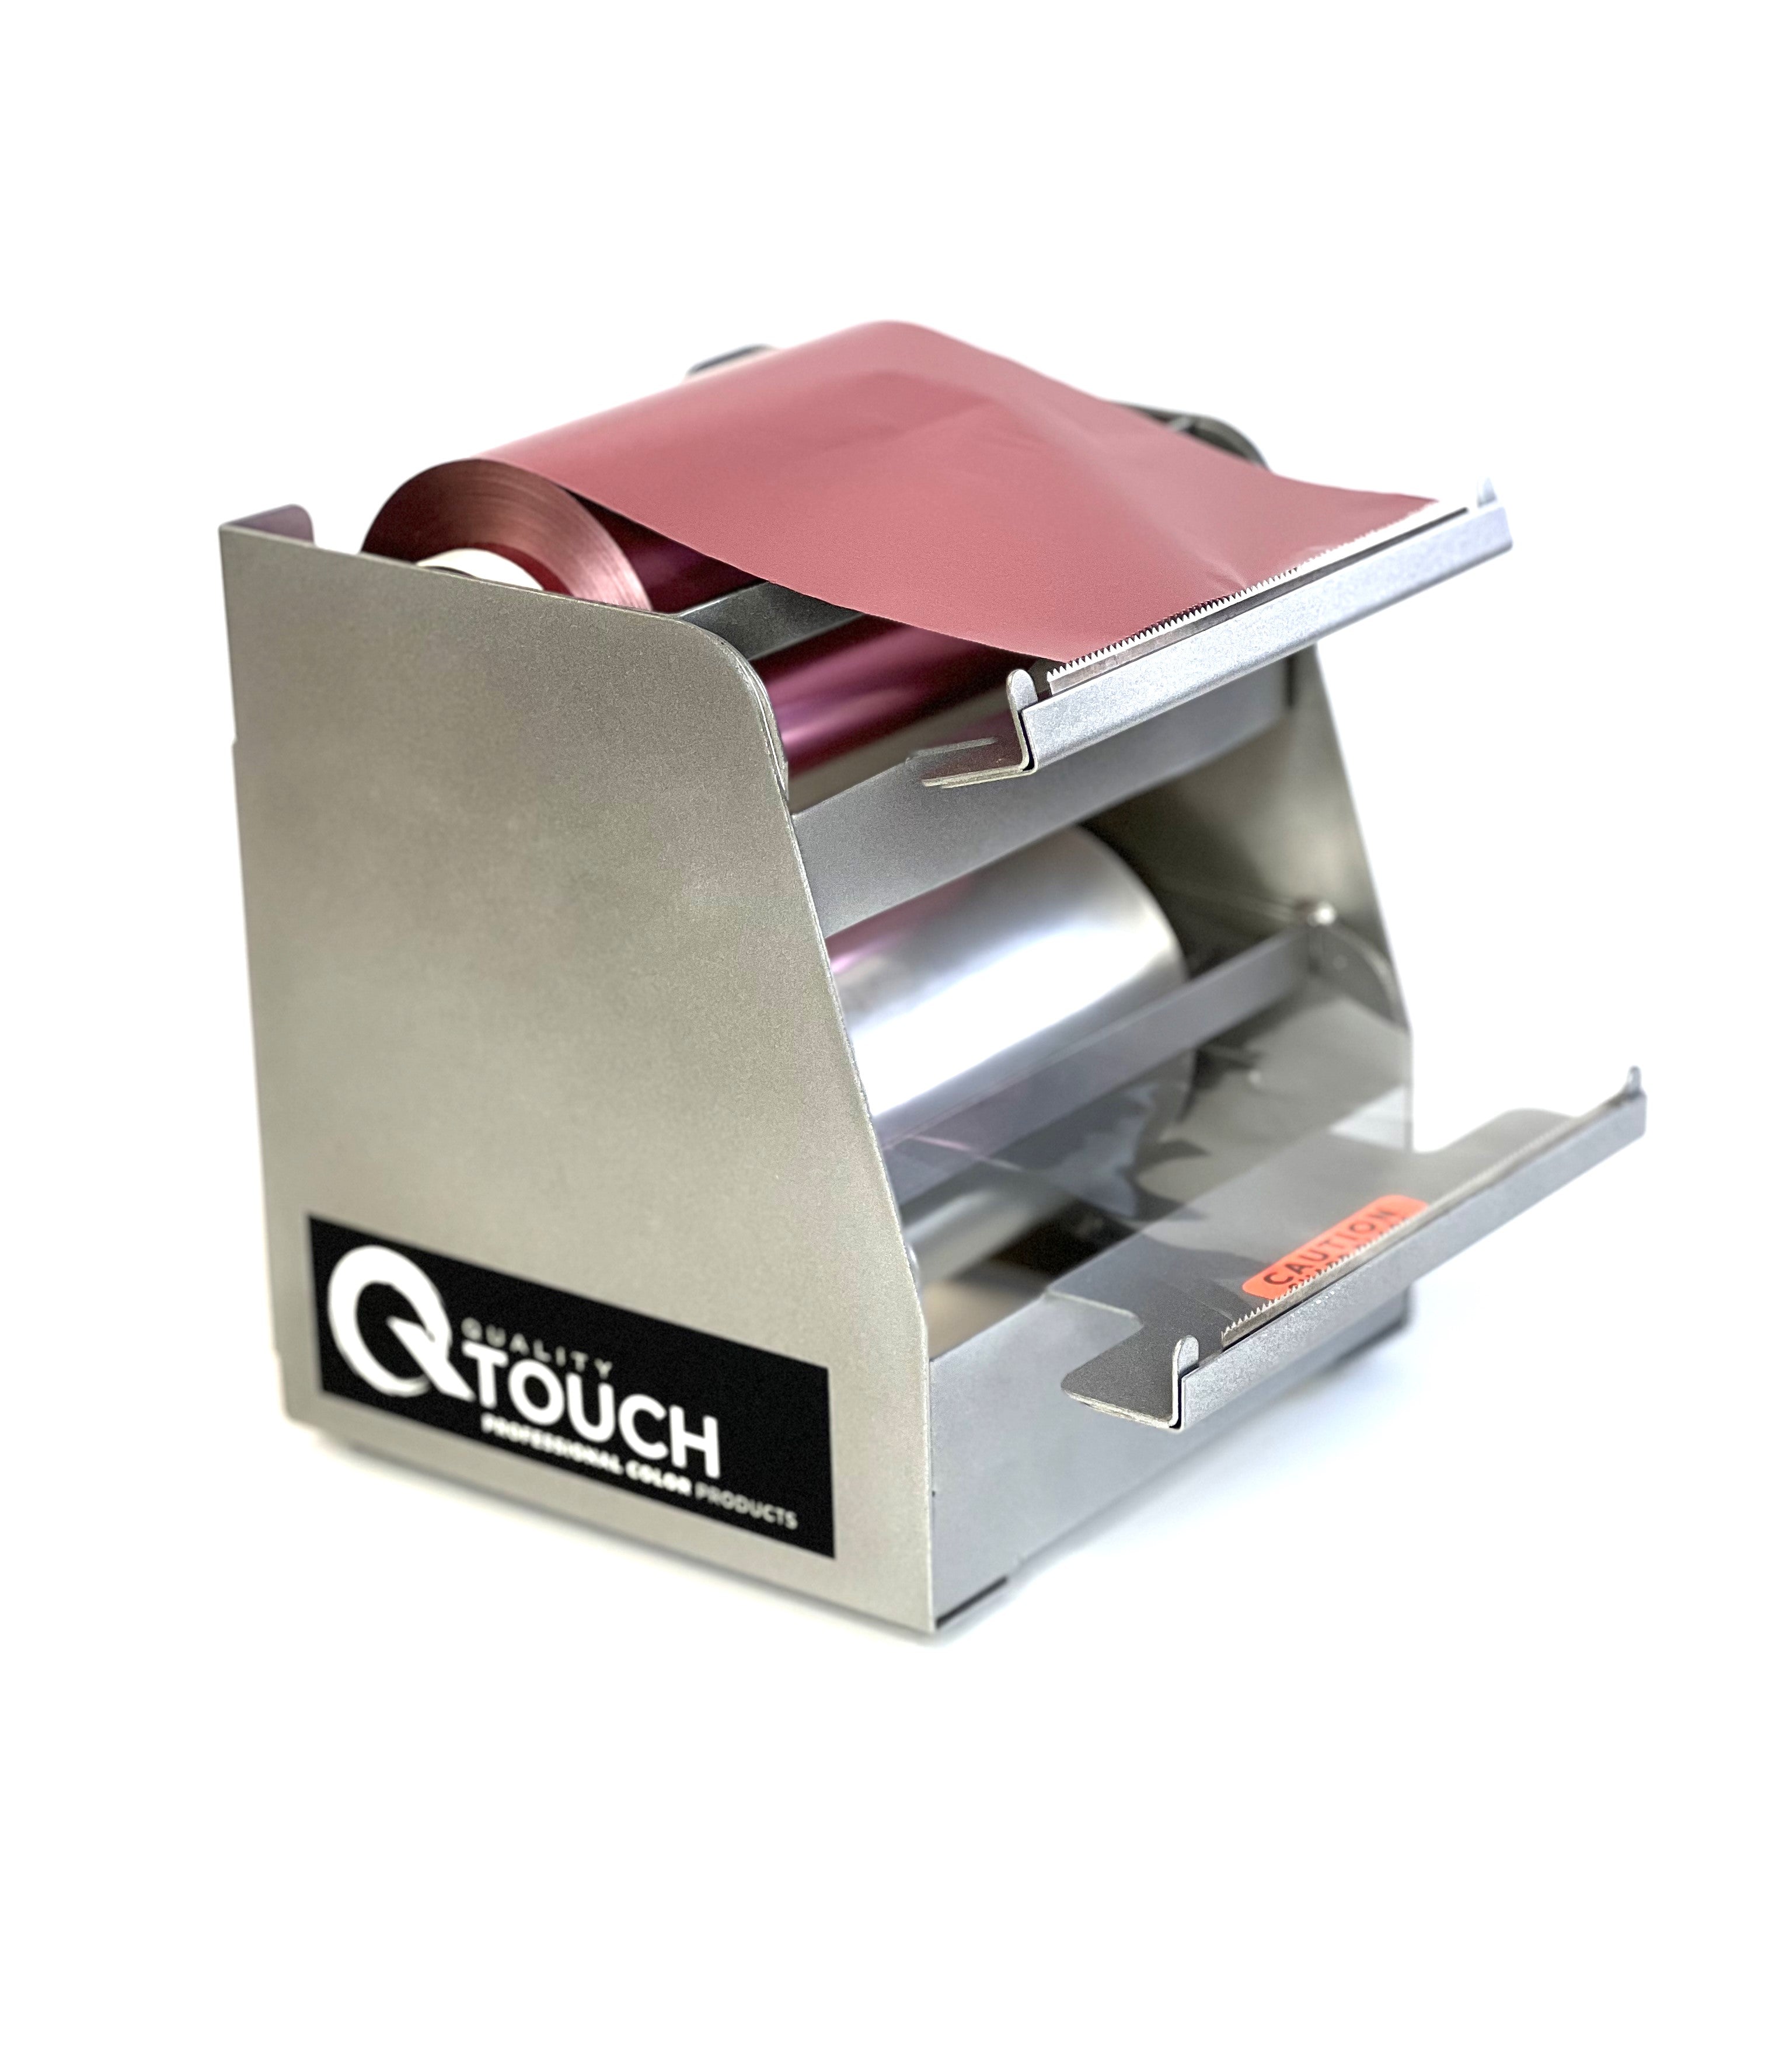 Quality Touch Double Tier Dispenser | foil and balayage film cutter